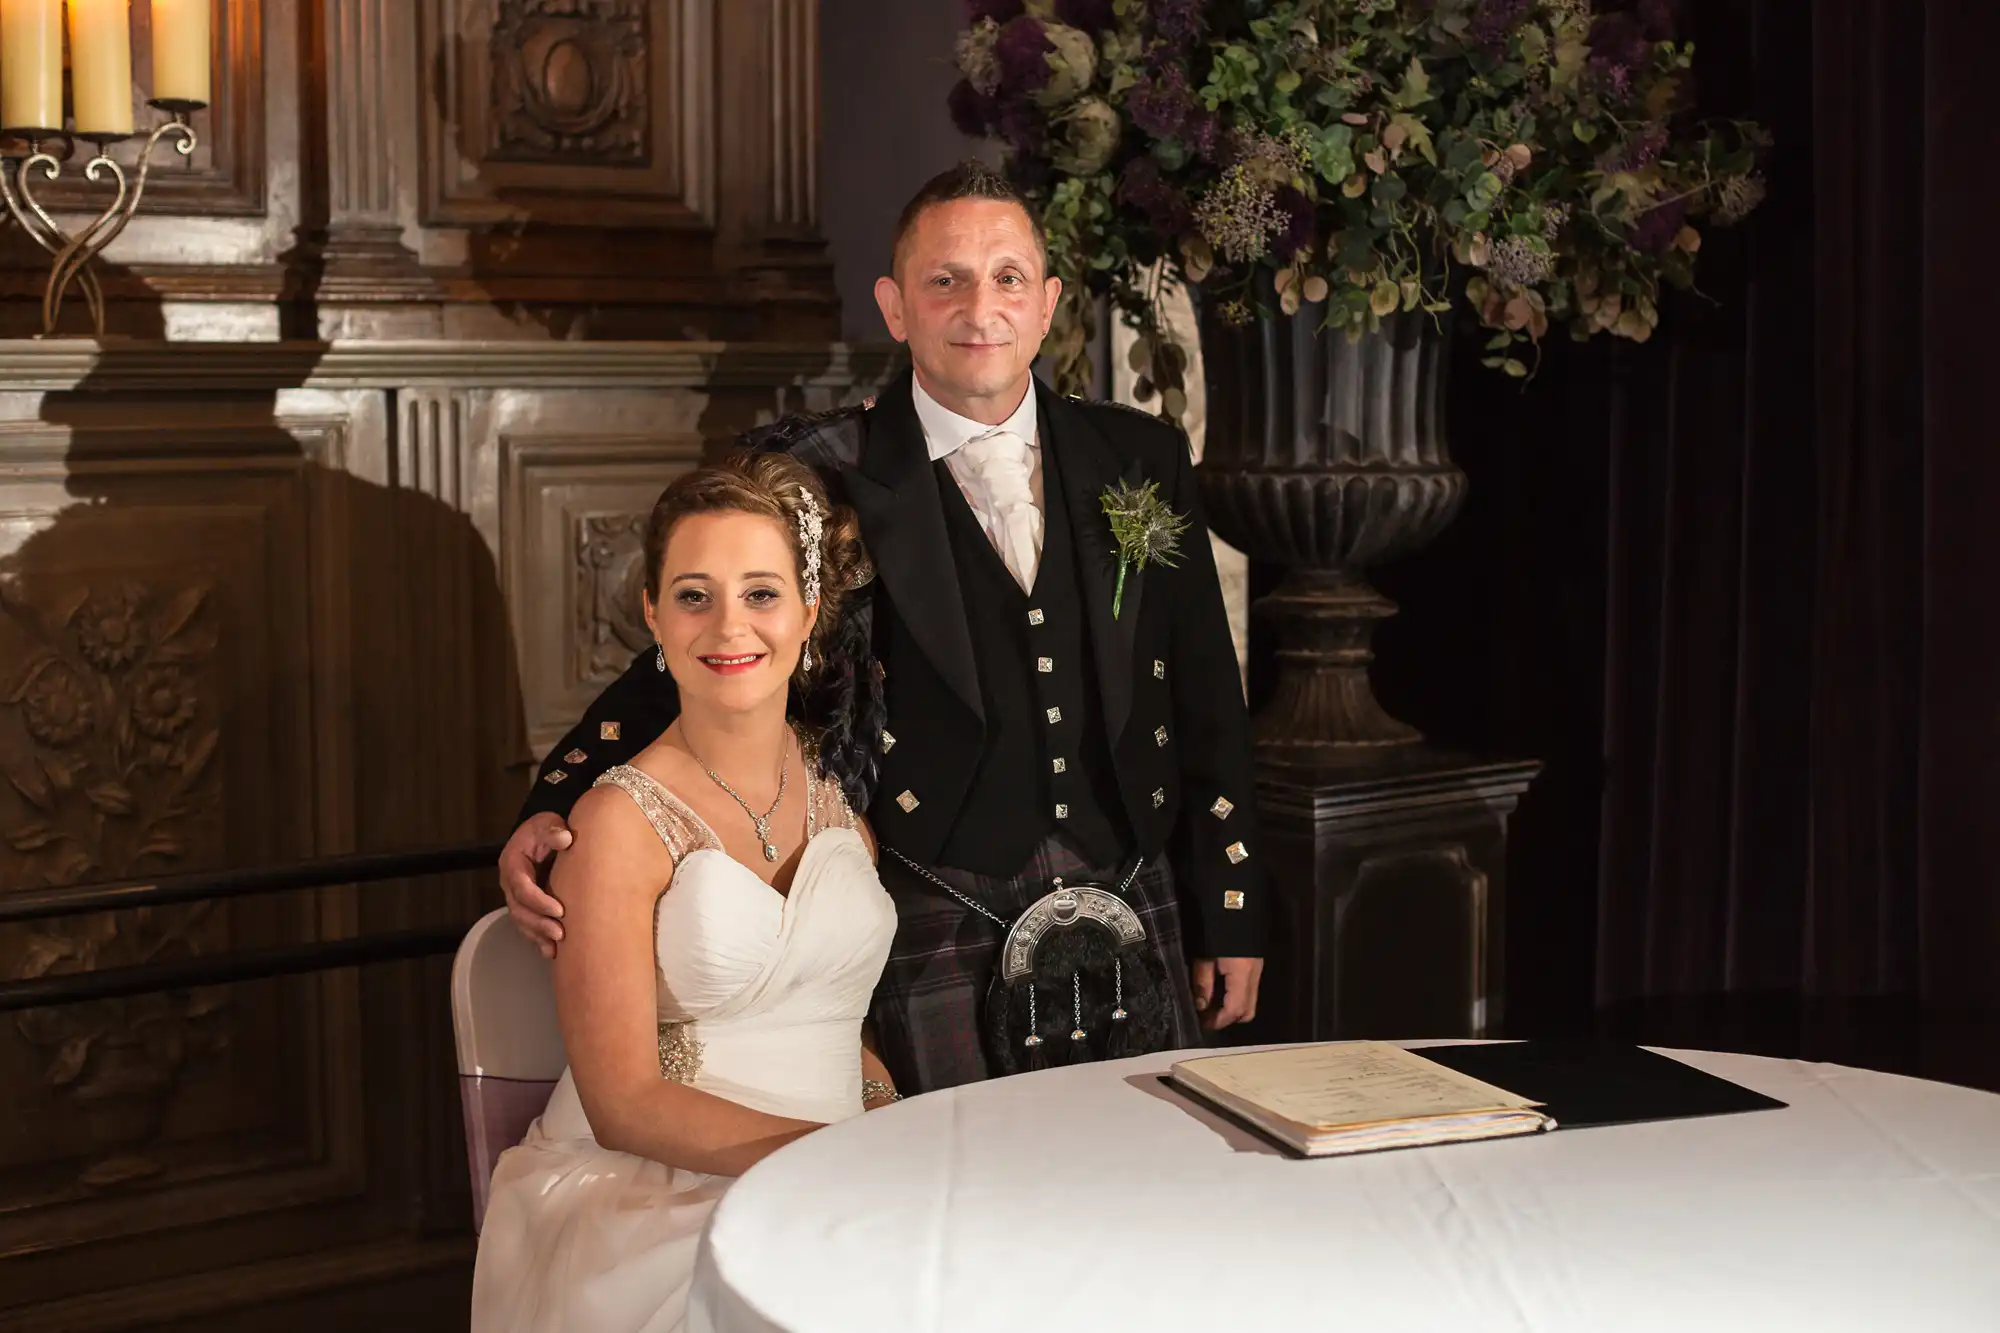 A bride and groom smiling, dressed in traditional scottish attire, standing beside a table in an opulent room.